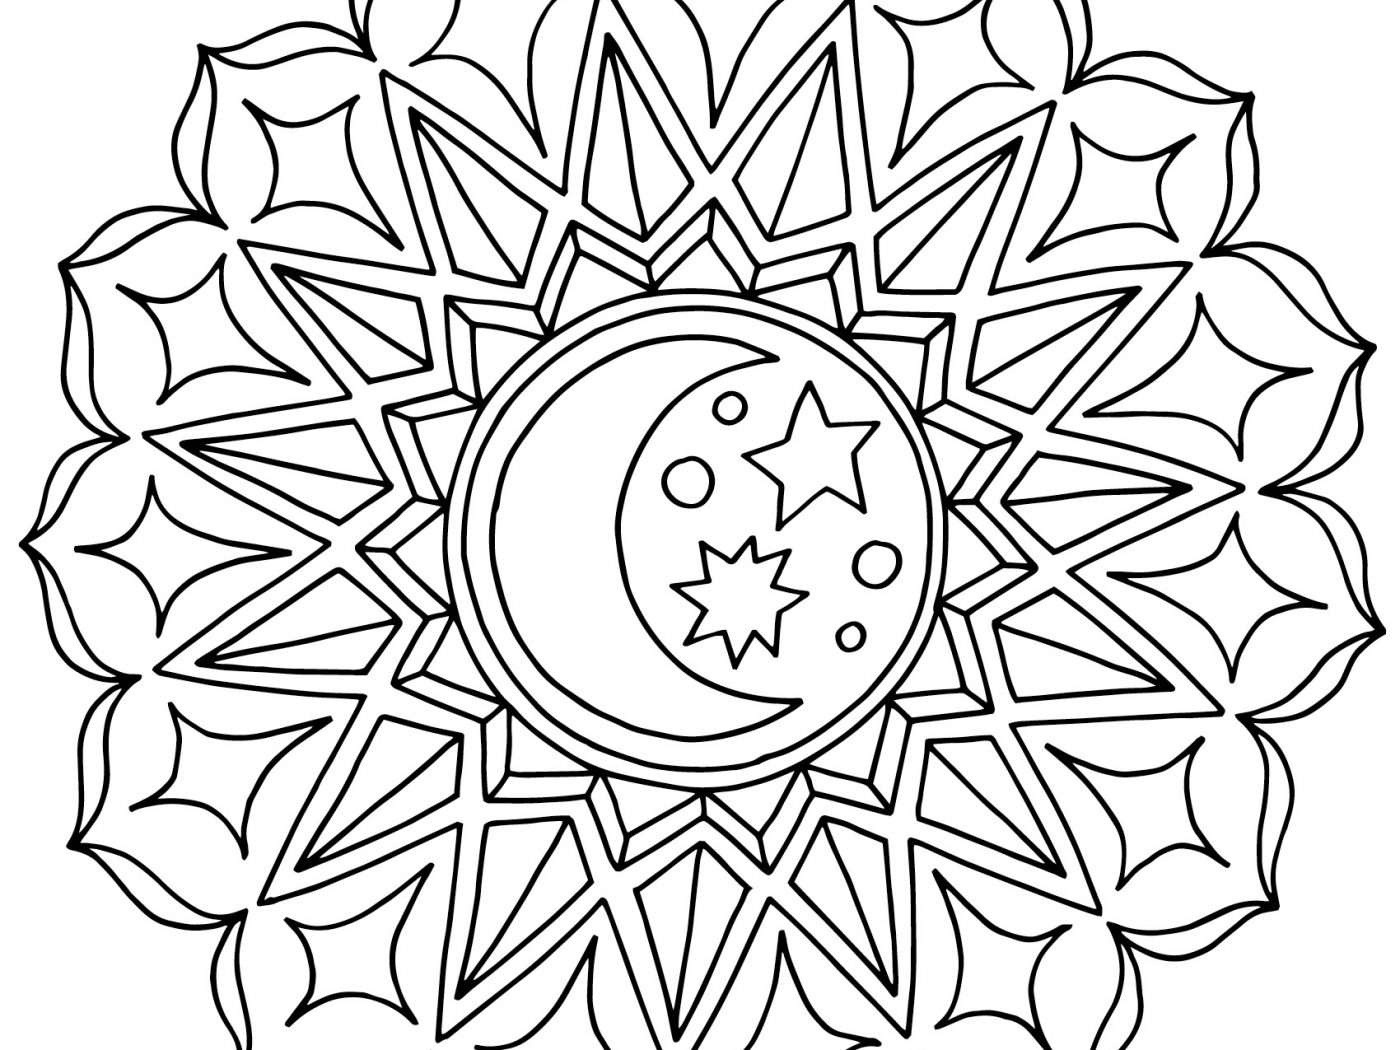 Islamic Geometric Patterns Coloring Pages at GetColorings  